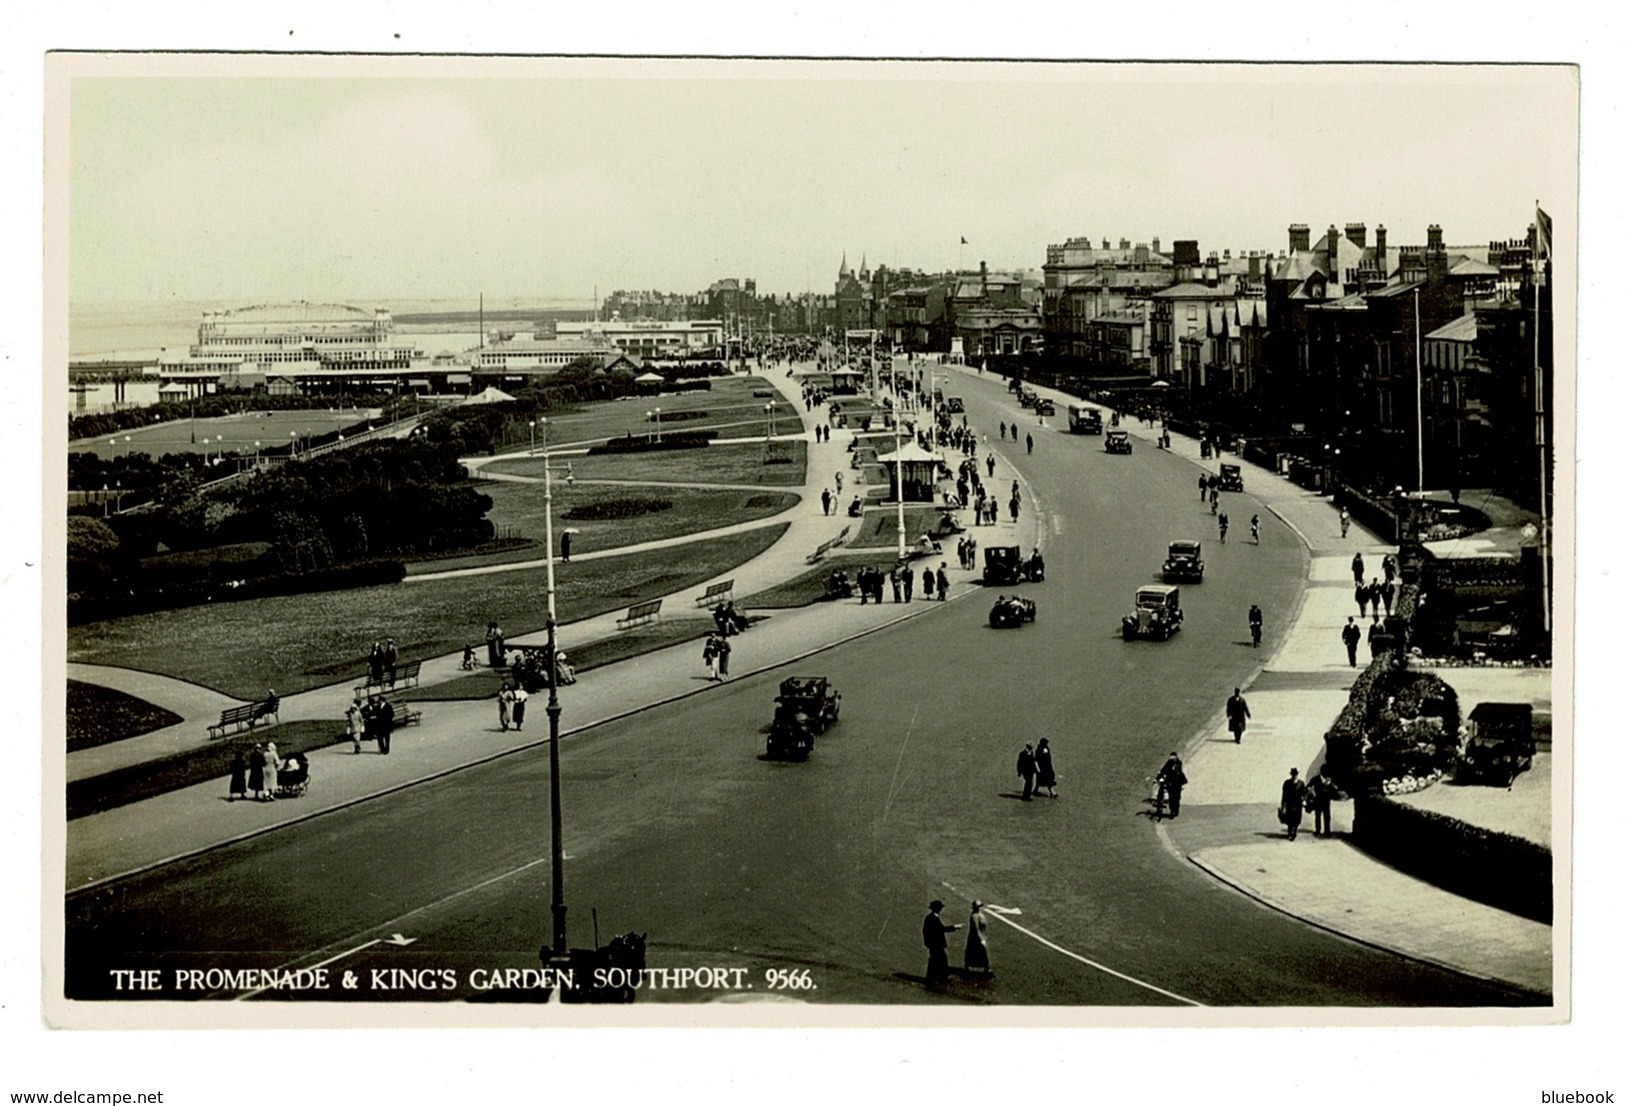 Ref 1379 - Early J. Salmon Real Photo Postcard - Cars Promenade & Kings Garden Southport - Southport